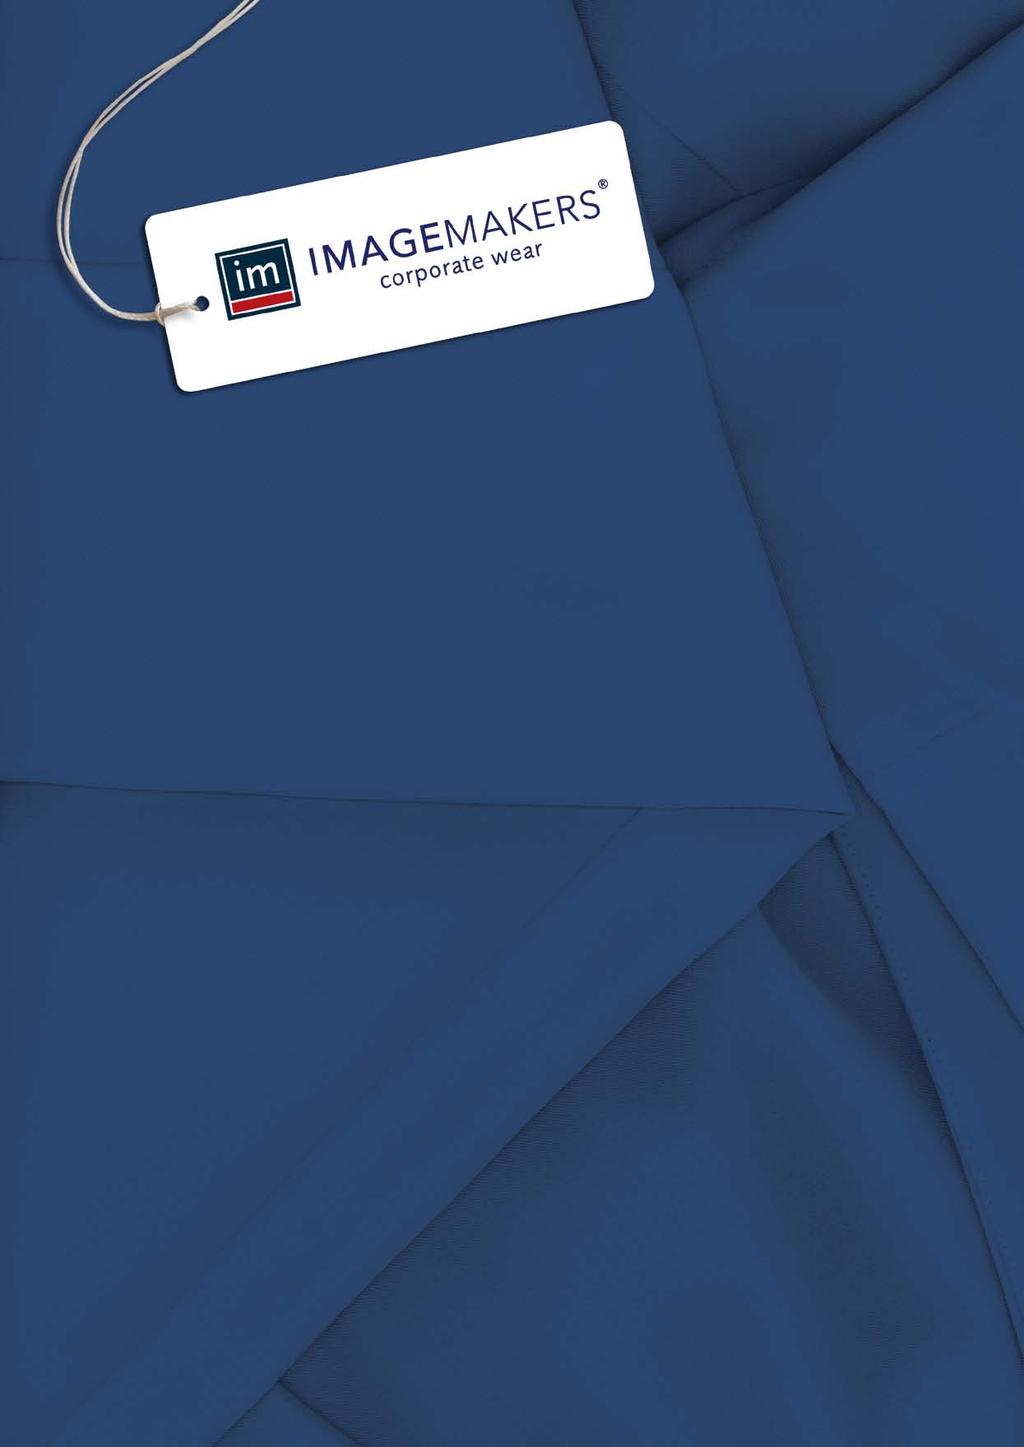 COLOUR UPDATE GUIDE FOR REF 17 Imagemakers has an exciting new range of colours and fabrics.